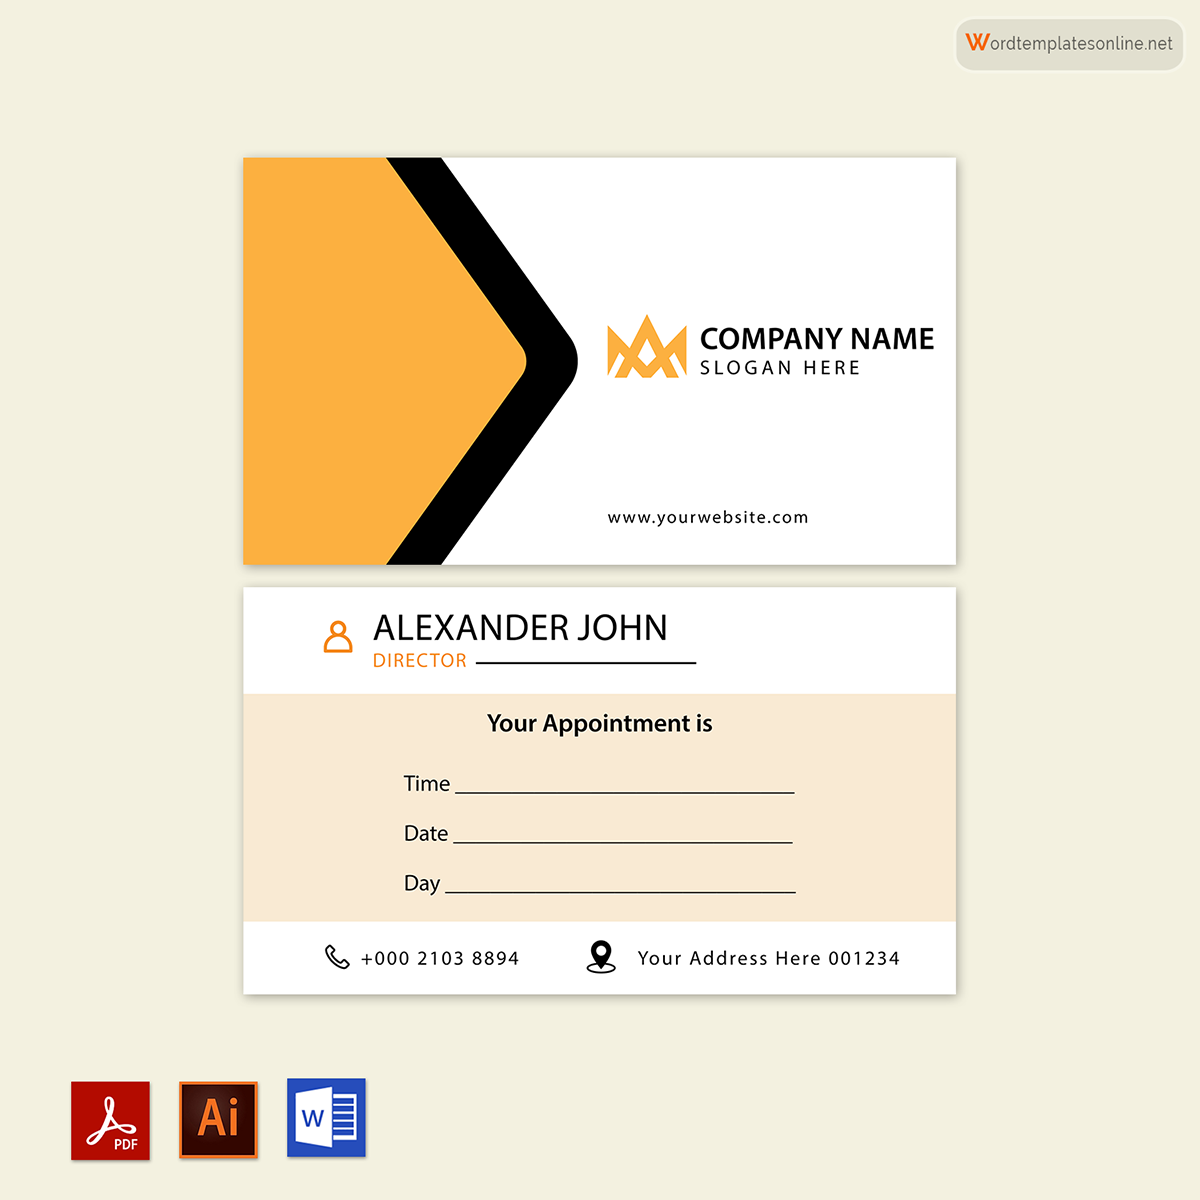 Download Free Appointment Card Template - Word, PDF, Illustrator